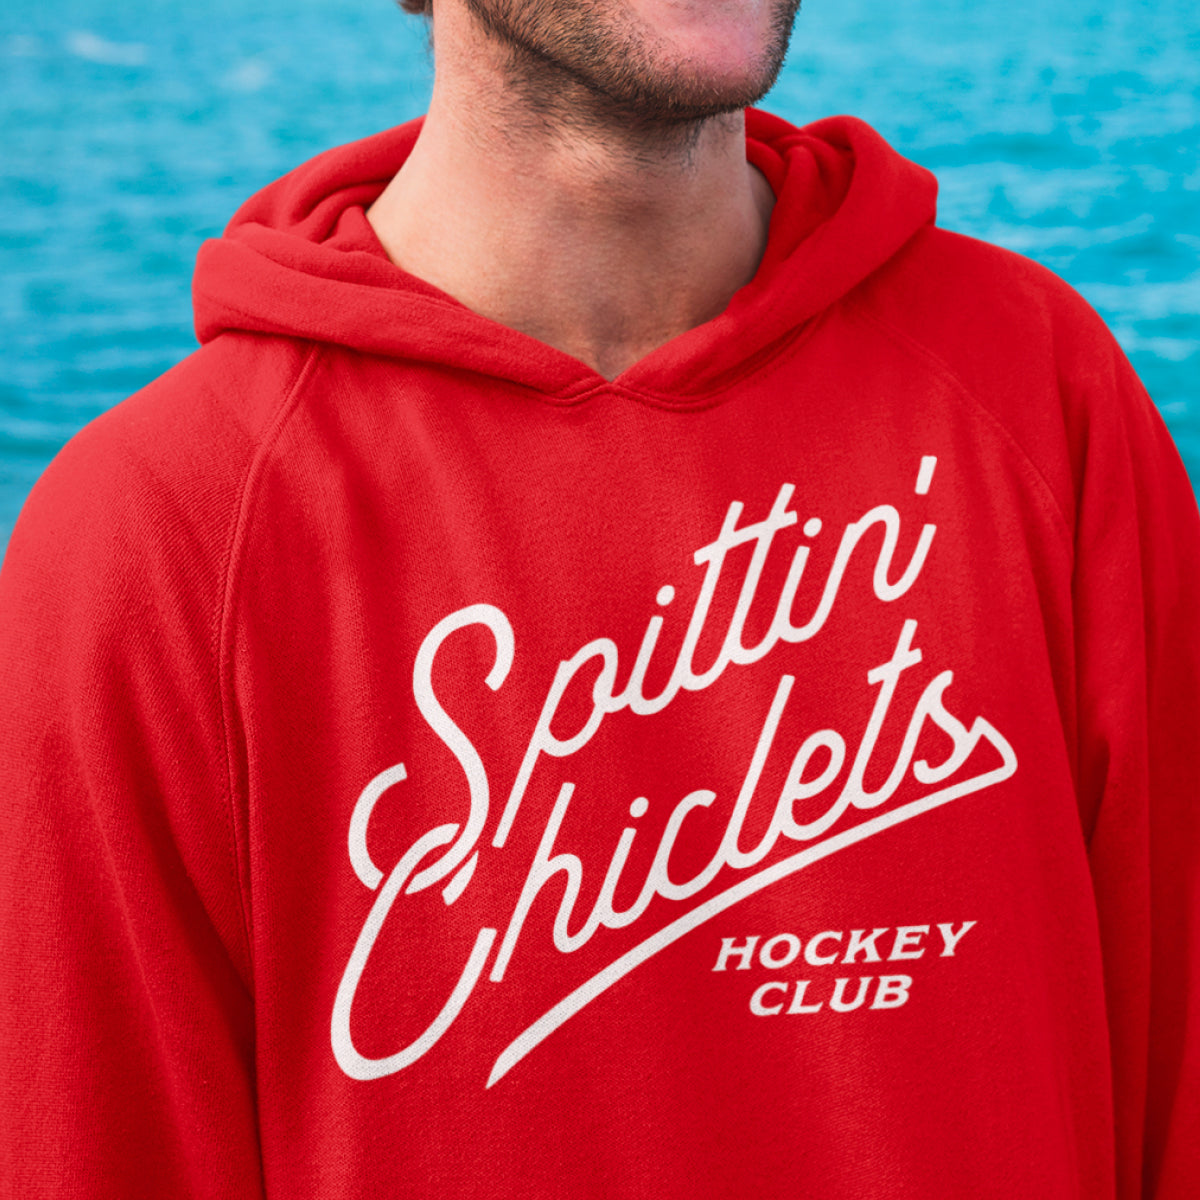 Spittin Chiclets Stacked Script Center Hoodie